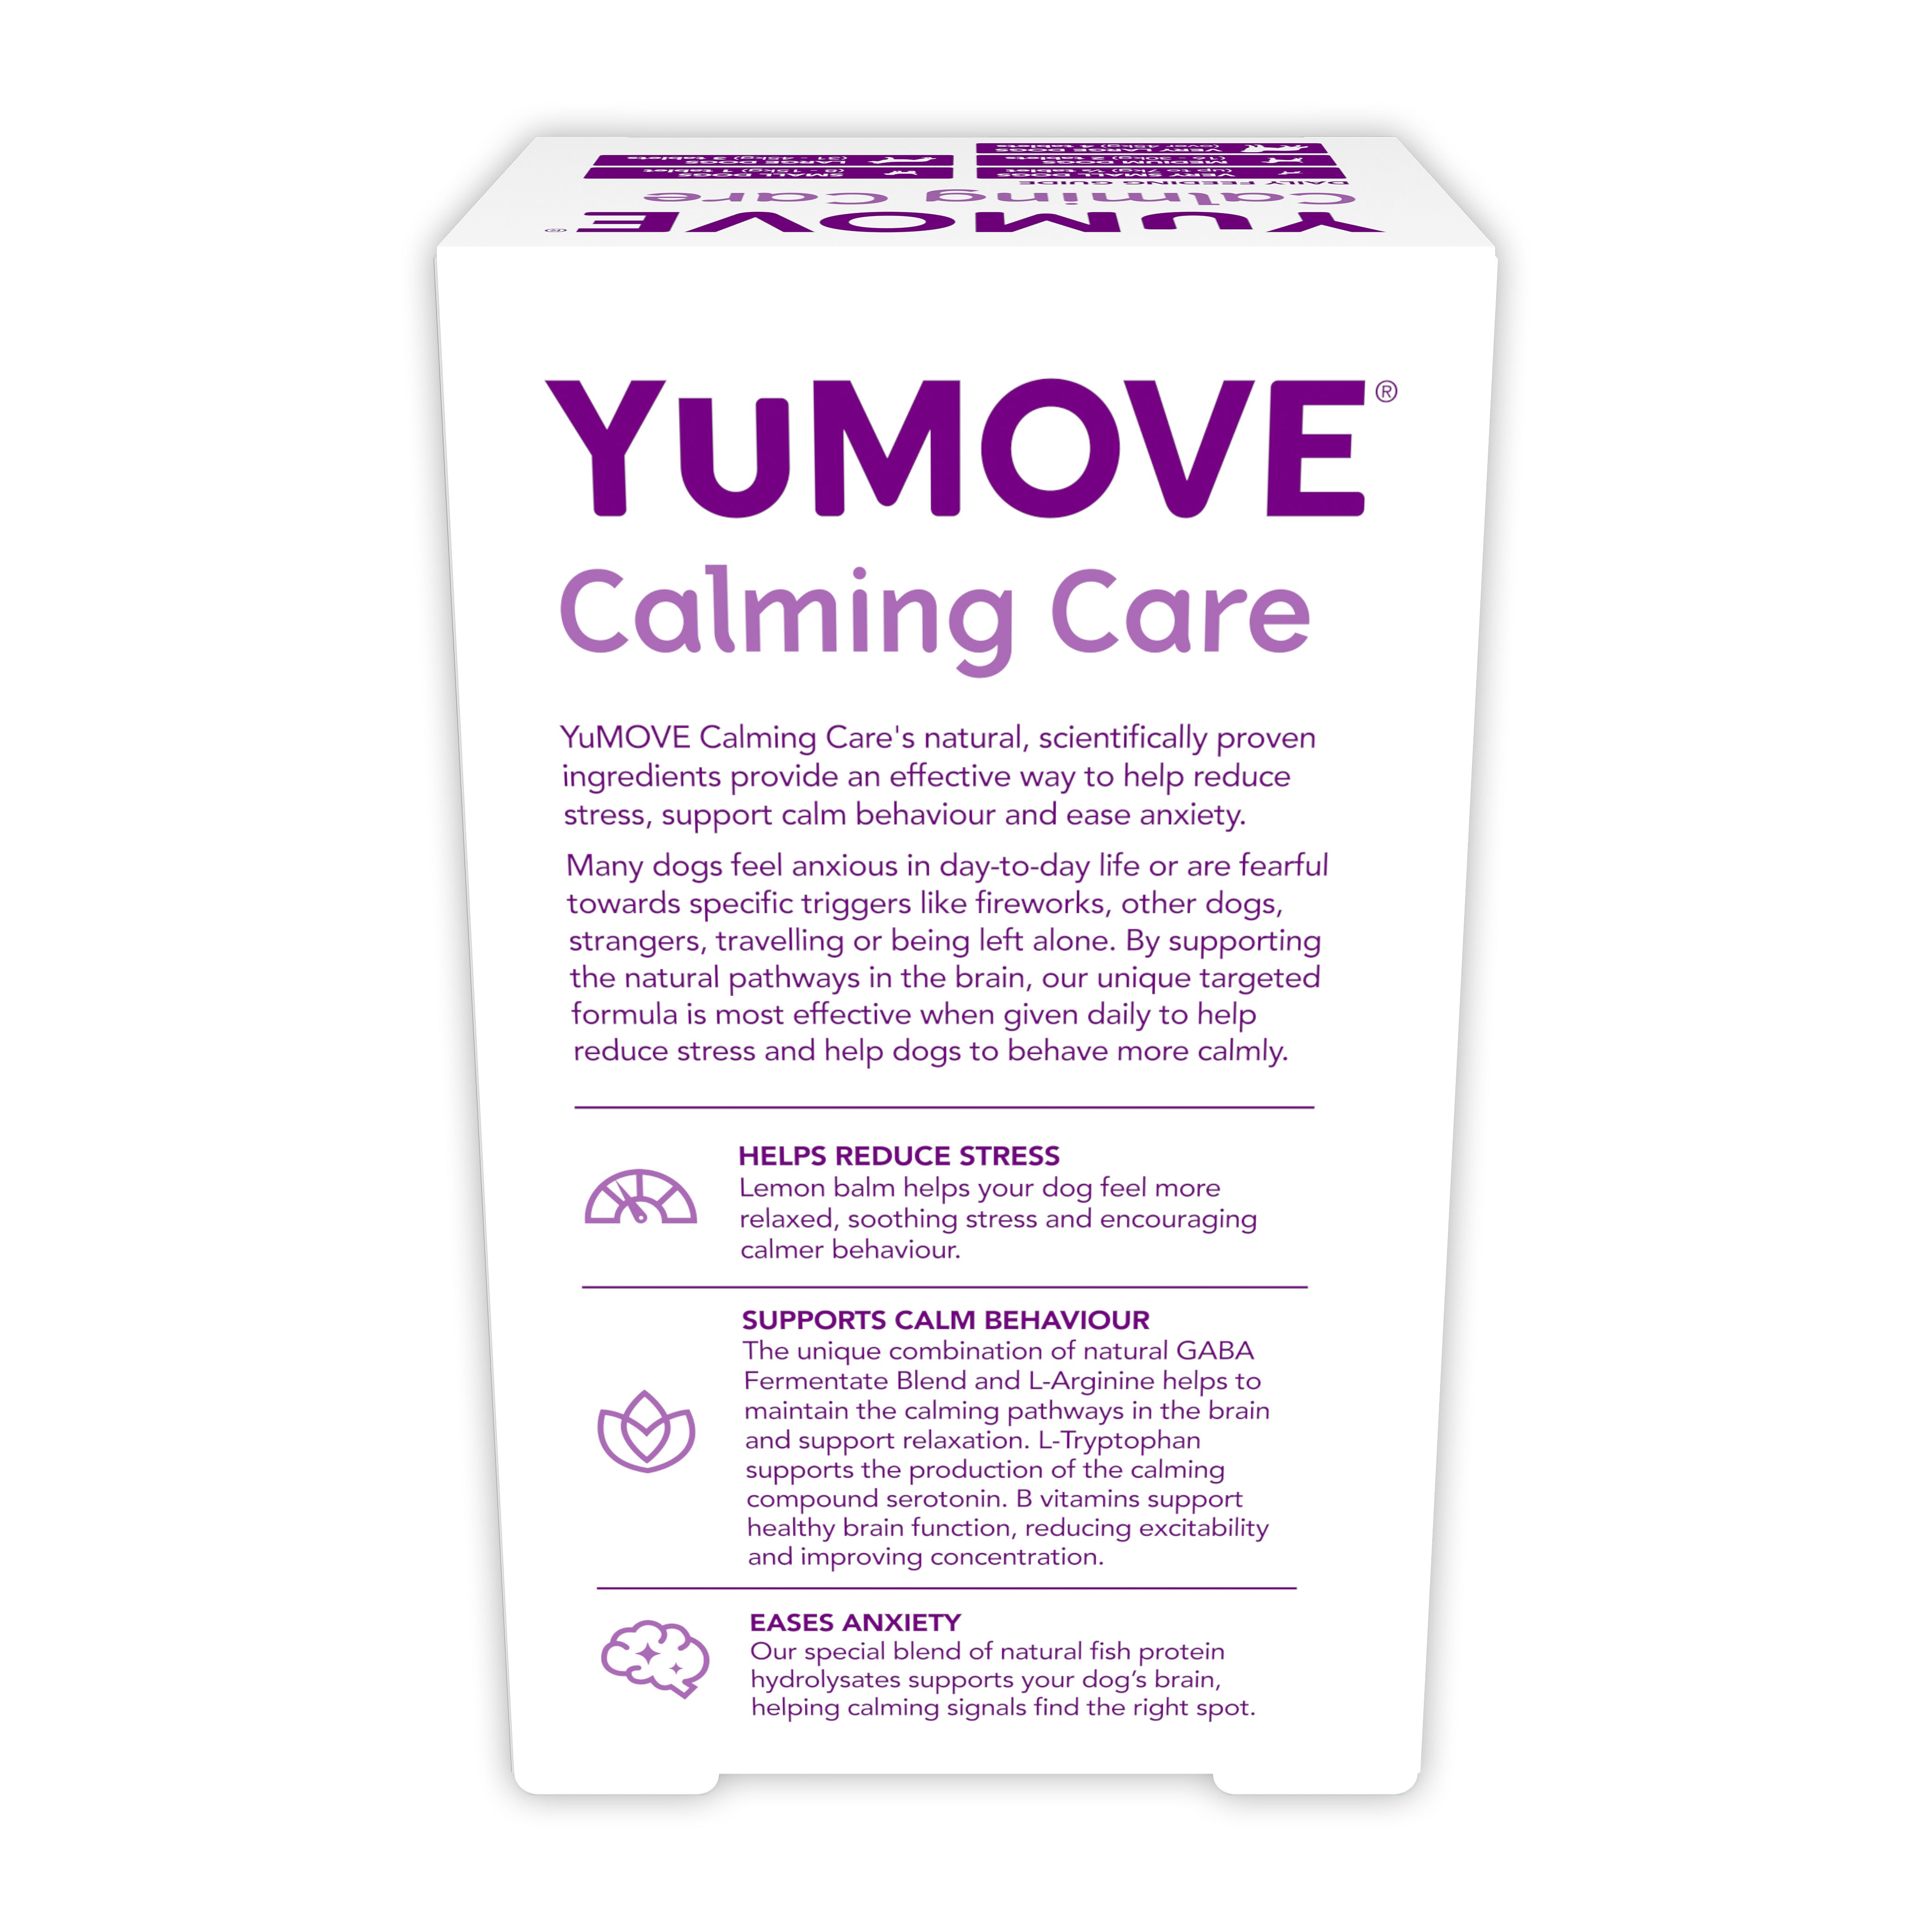 YuMOVE Calming Care for Adult Dogs